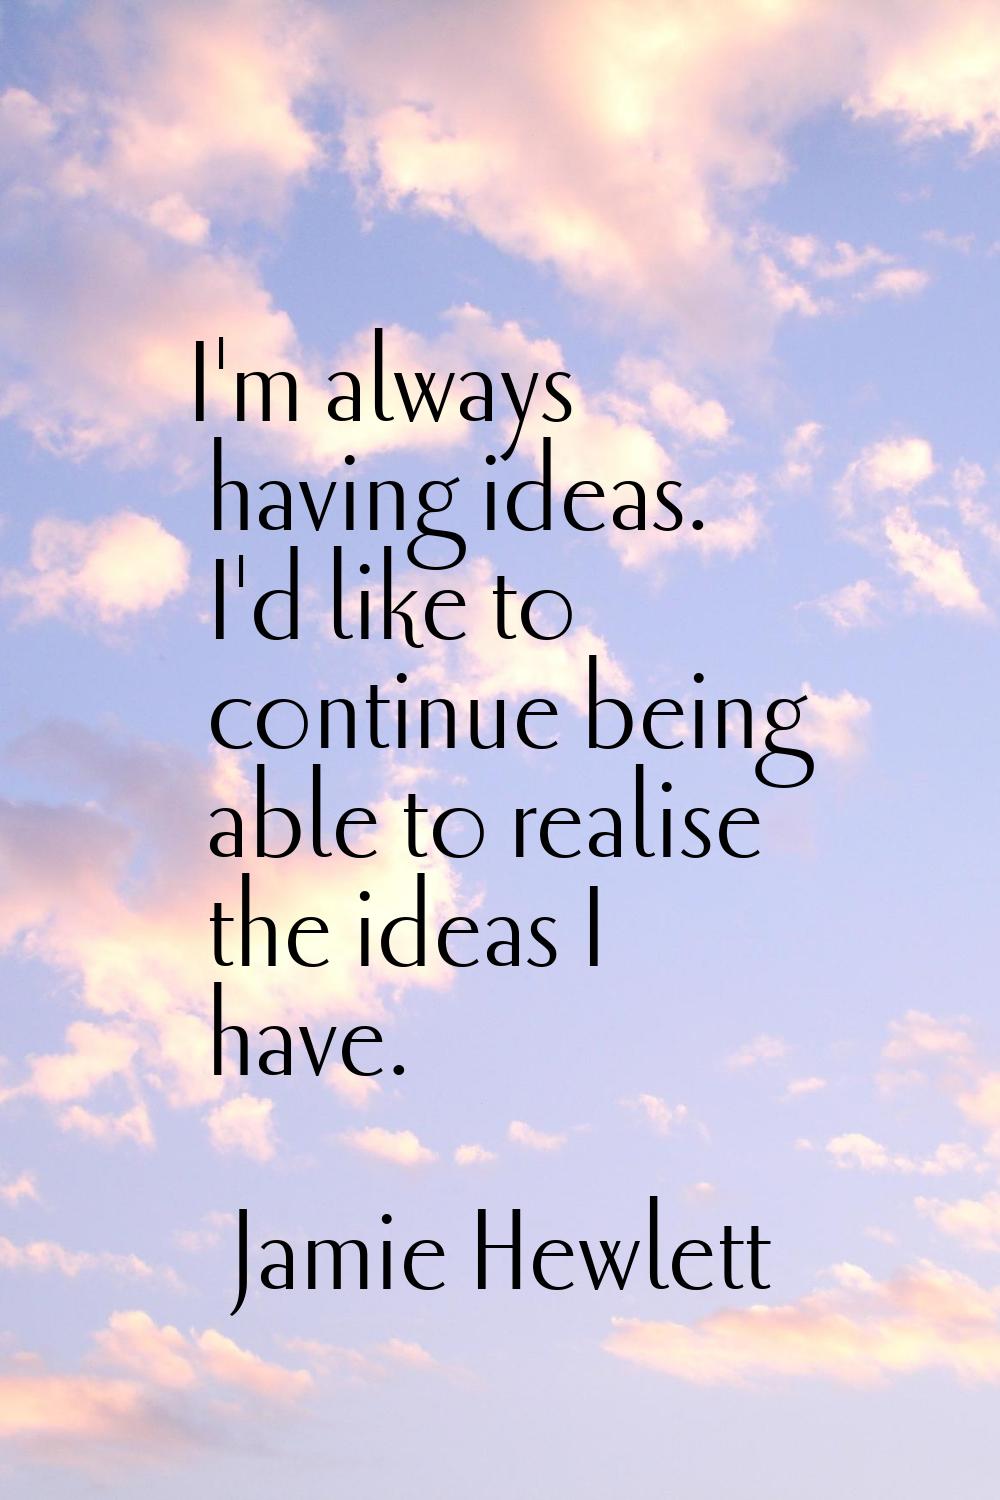 I'm always having ideas. I'd like to continue being able to realise the ideas I have.